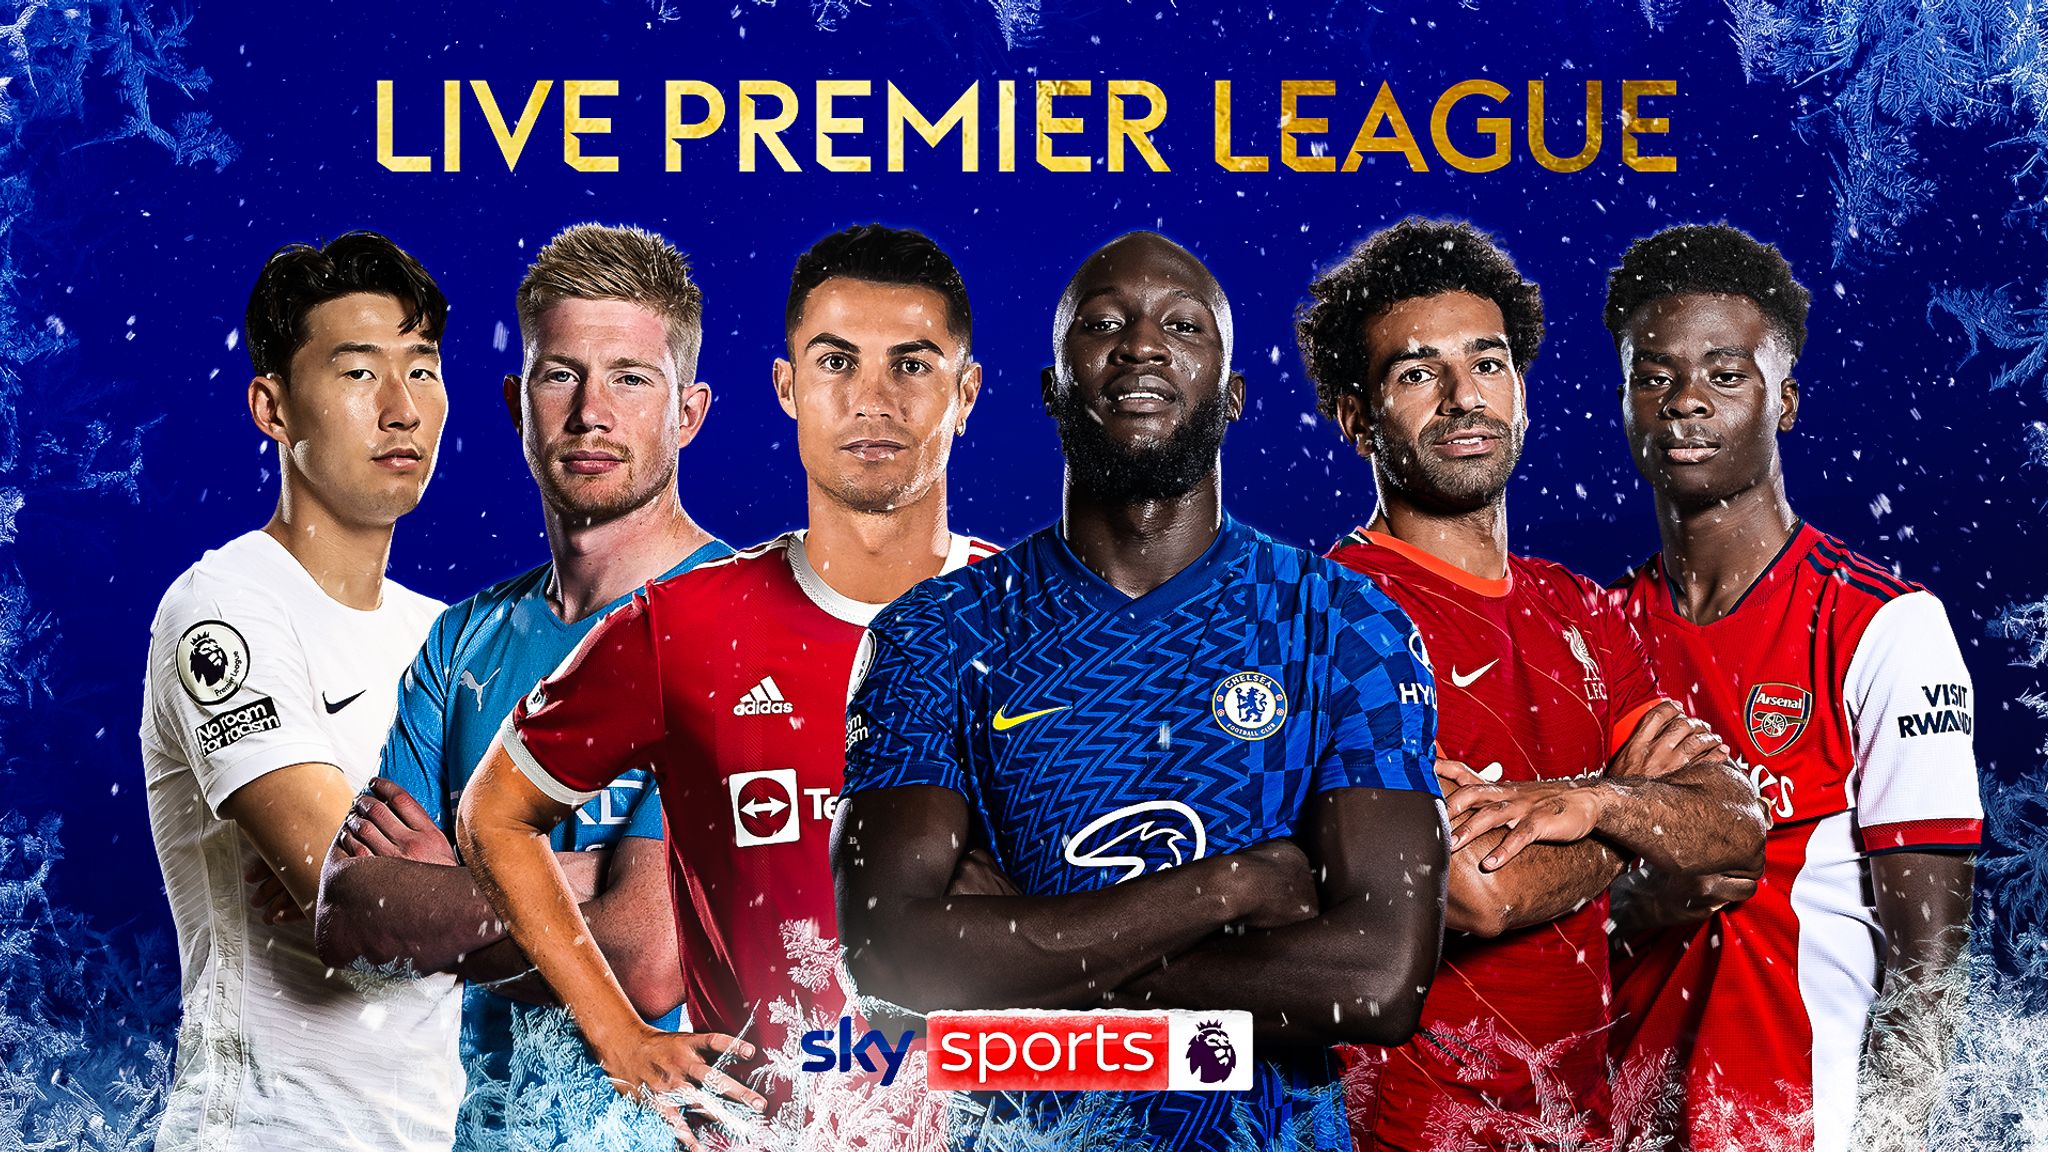 Premier League live on Sky Sports Chelsea vs Liverpool, Christmas and New Year fixtures announced Football News Sky Sports